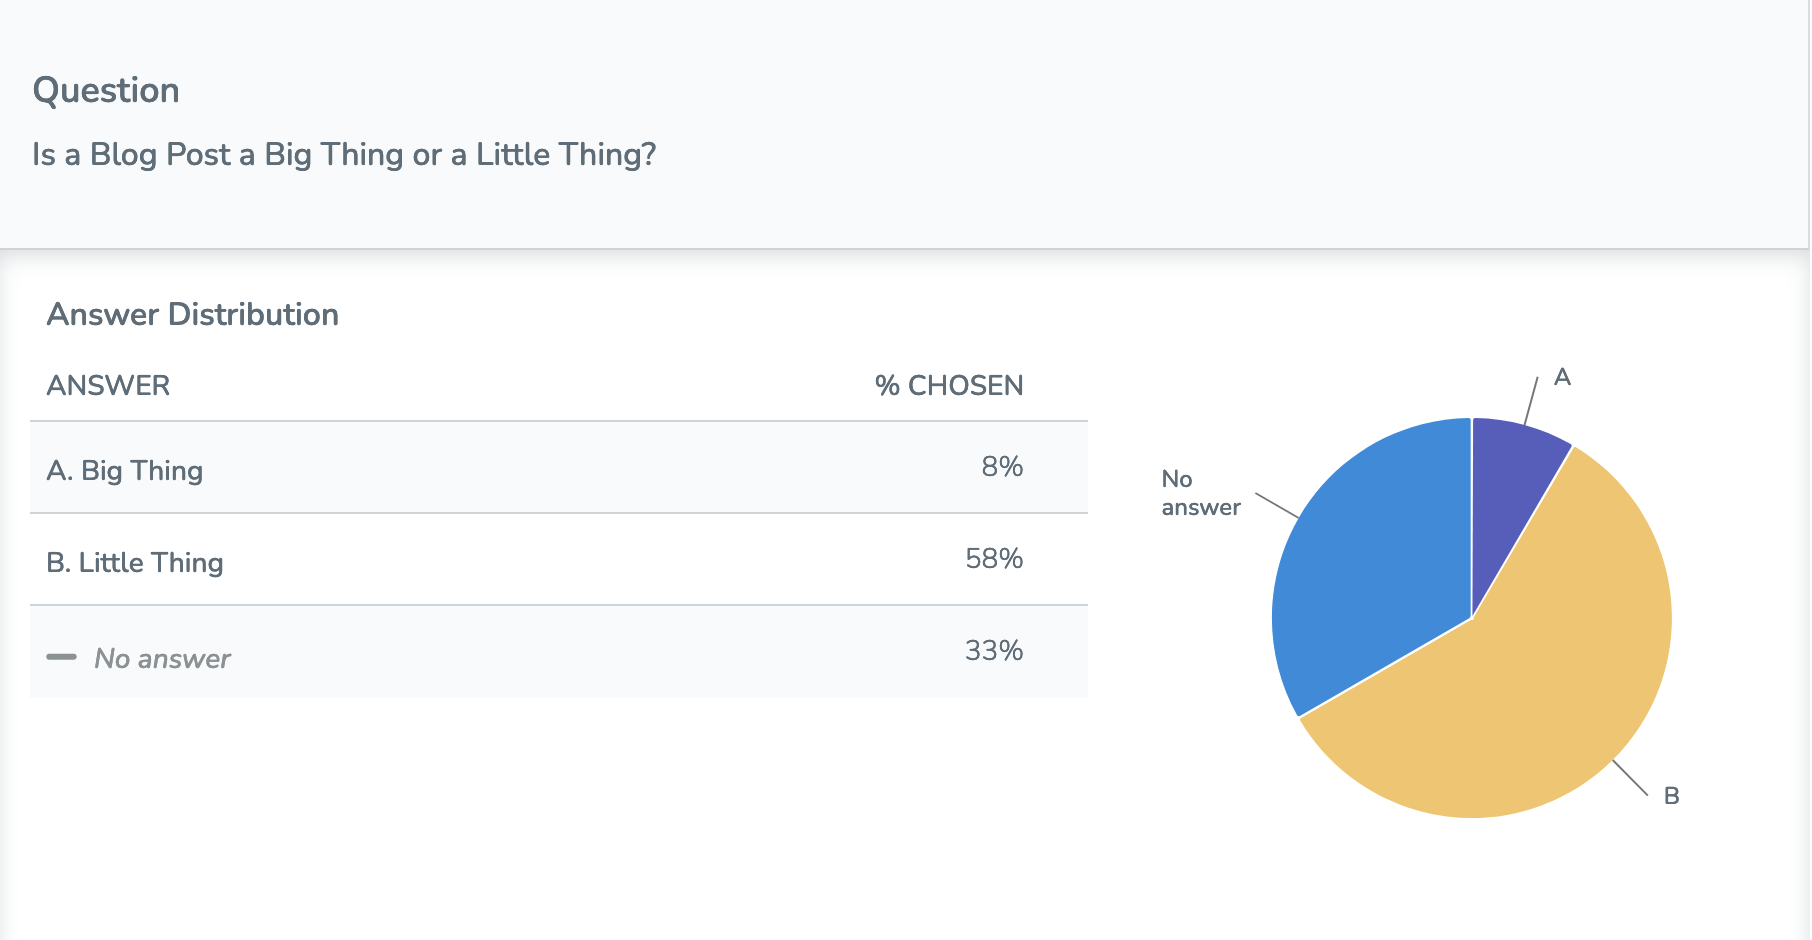 A chart showing student response percentages to the question "Is a Blog Post a Big Thing or a Little Thing?".  8% answered Big Thing, 58% answered Little Thing, and 33% did not respond.